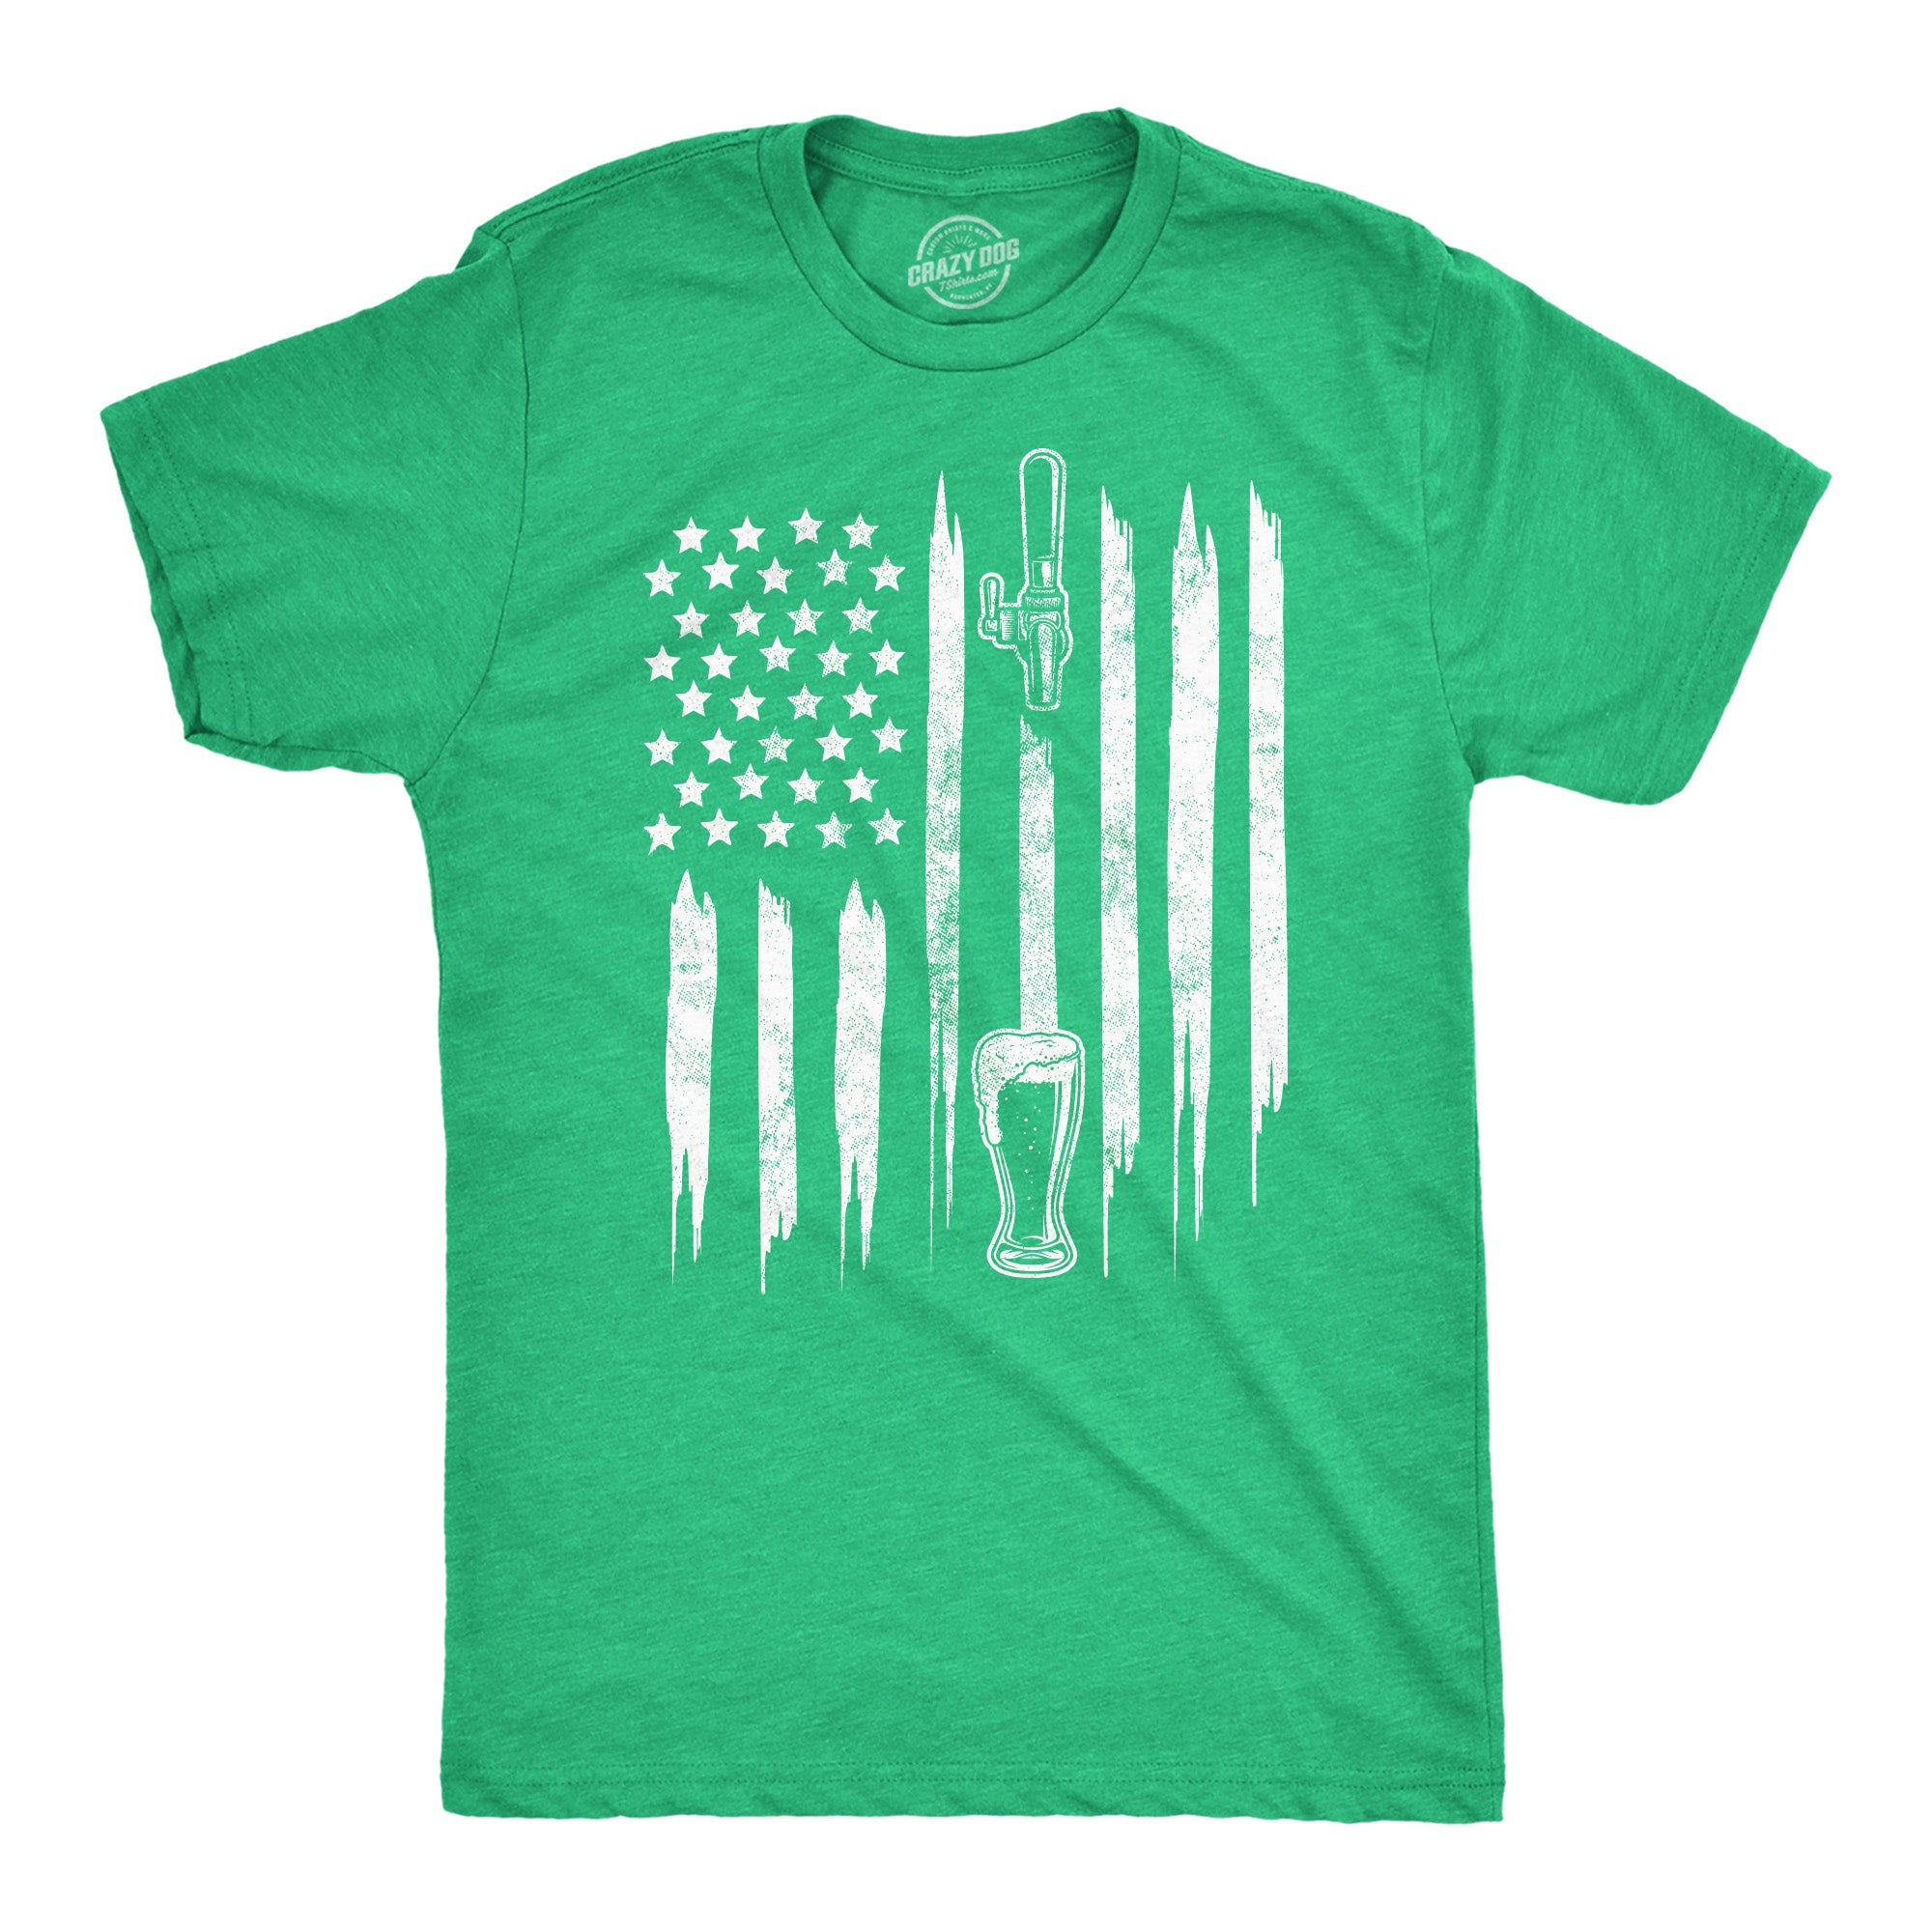 Funny Heather Green - Craft Beer American Flag Craft Beer American Flag Mens T Shirt Nerdy Saint Patrick's Day Drinking Tee